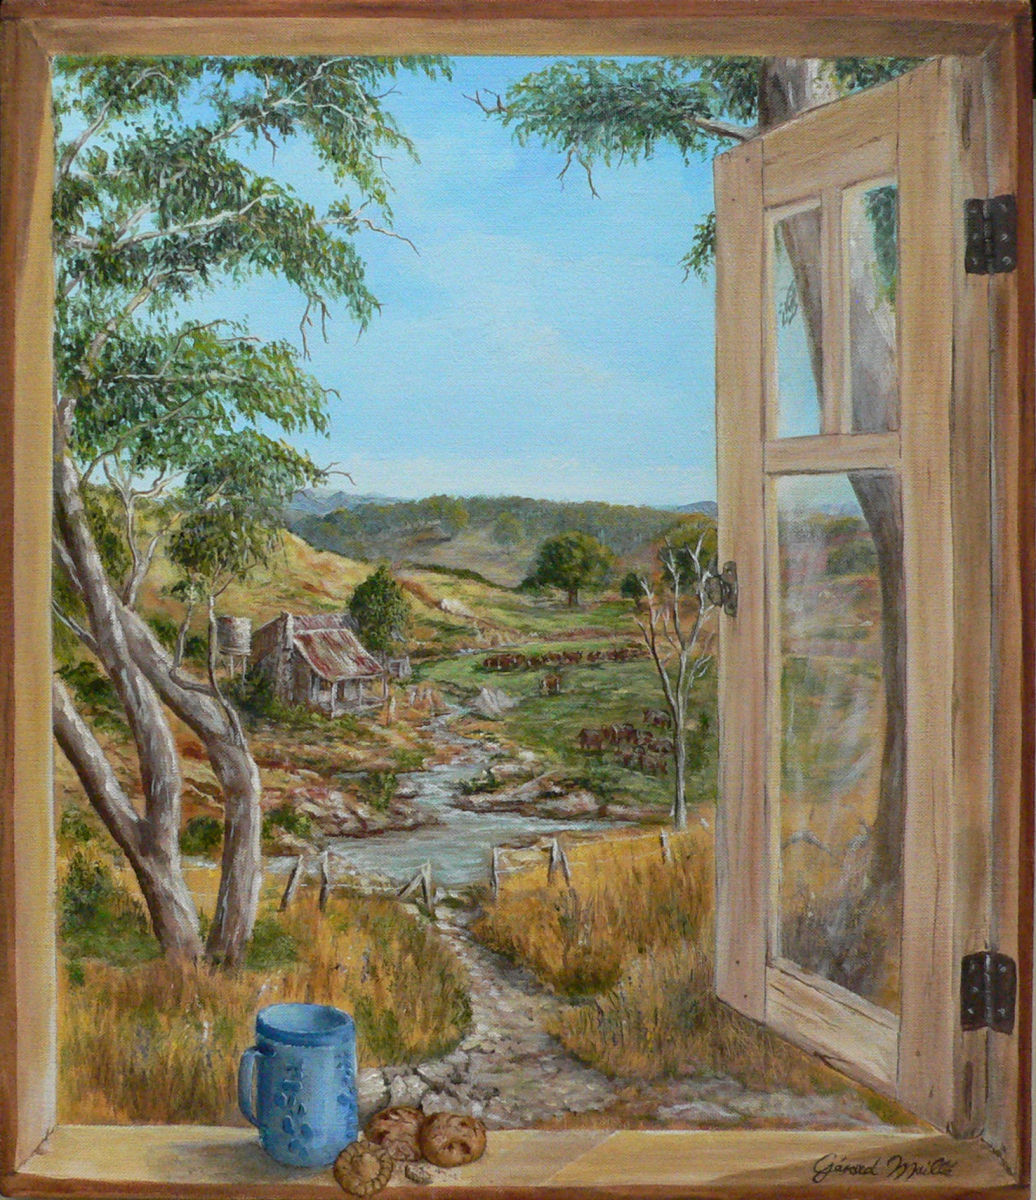 Window to Serenity by Gerard  Image: "Window to Serenity" is a "Trompe L'oeil" which showcases a window view of a farm scene in rural Australia.